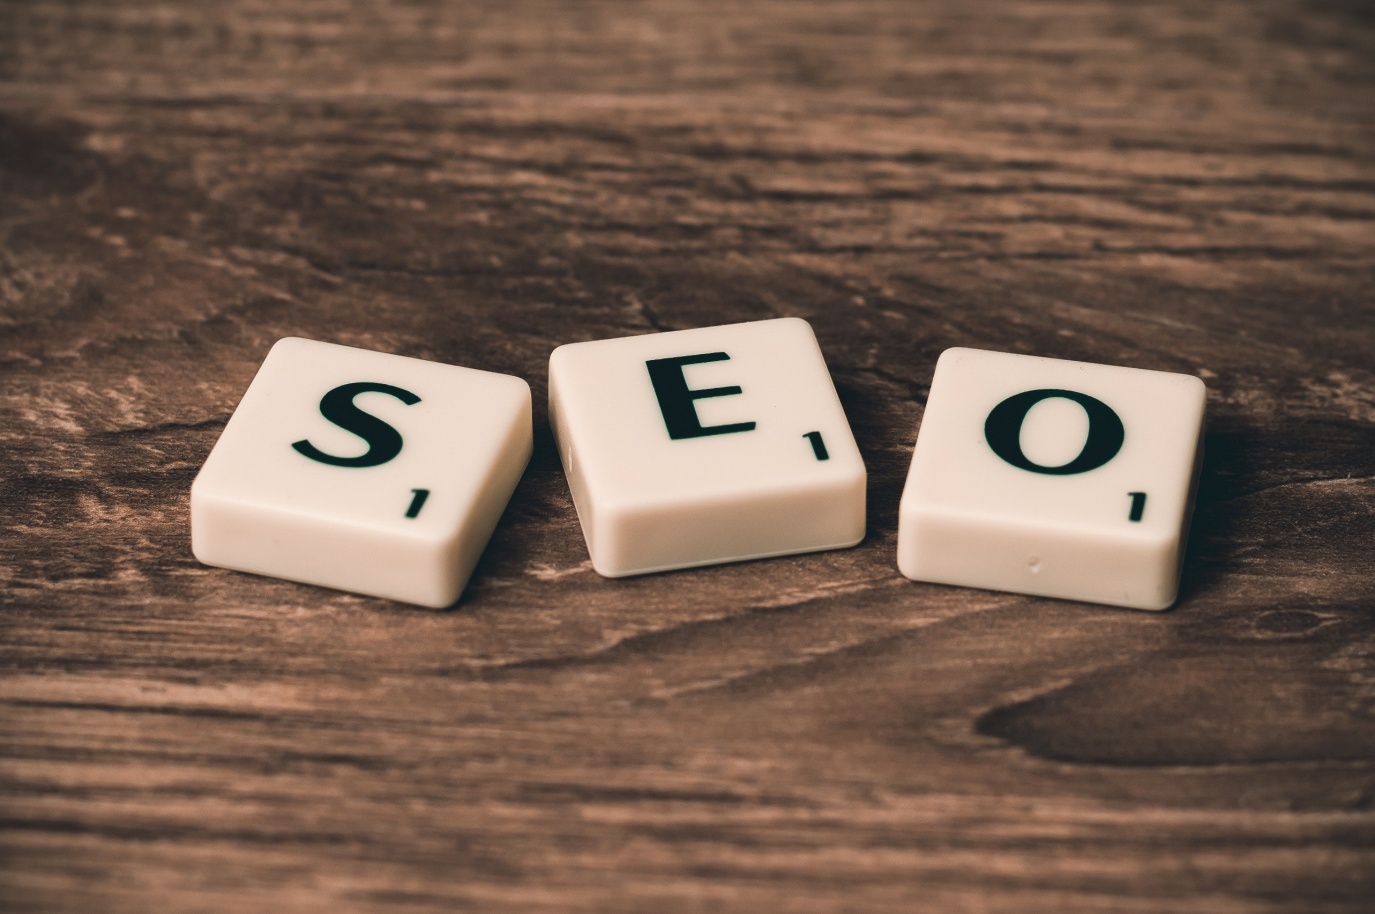 A photo of letter blocks placed together making word "SEO"